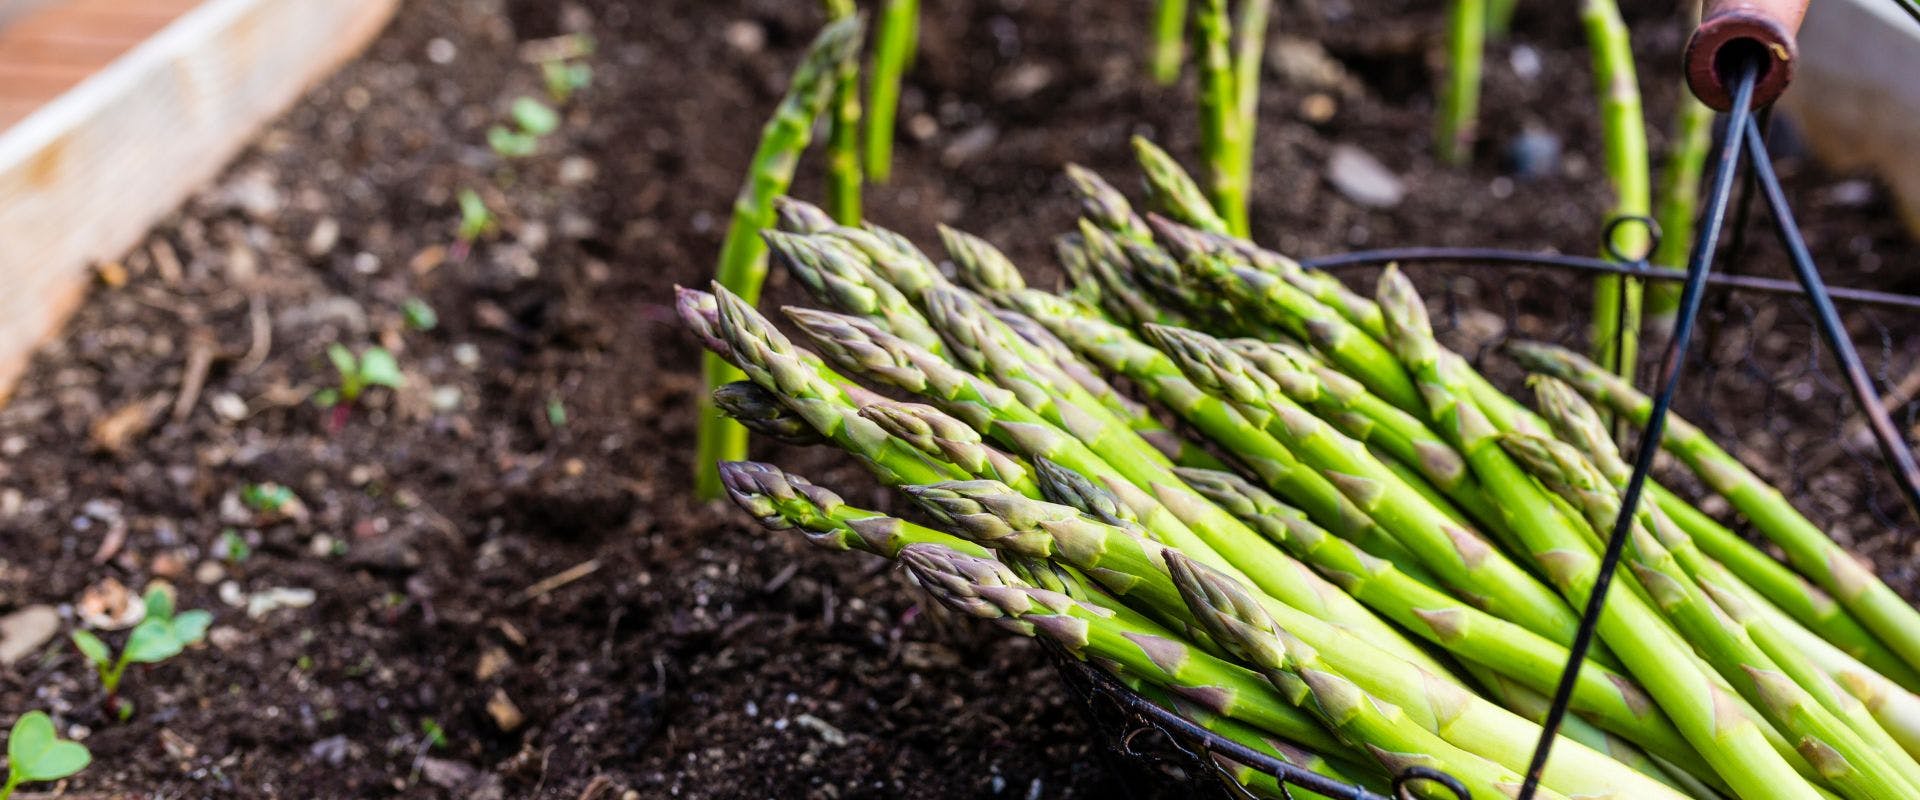 Asparagus in a basket on a bed of soil